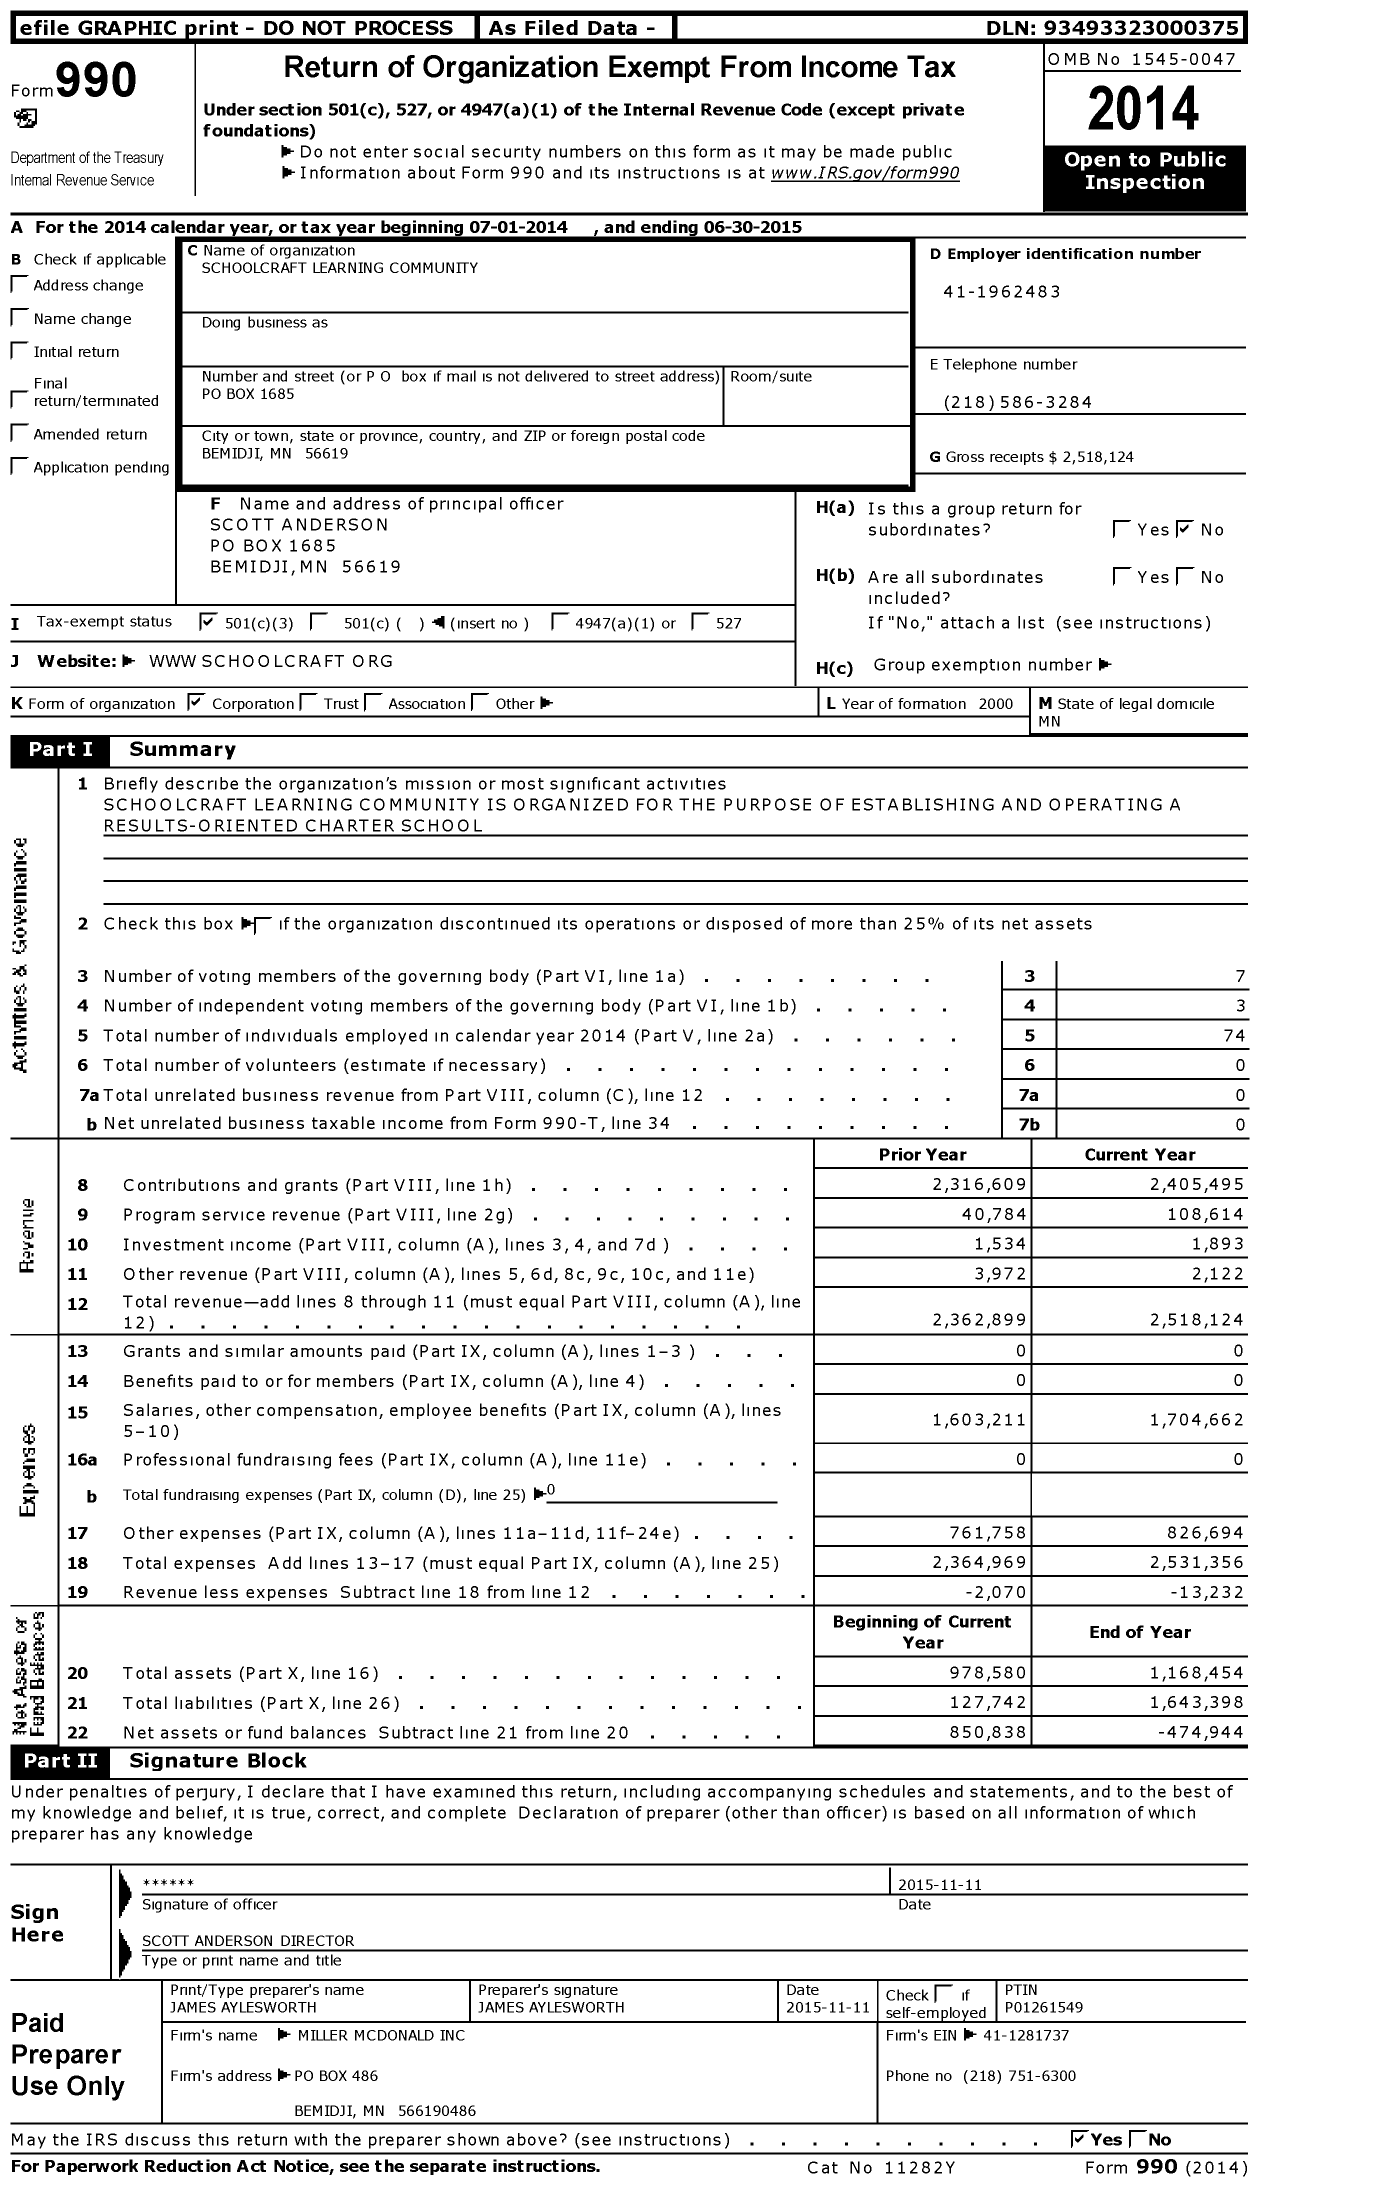 Image of first page of 2014 Form 990 for Schoolcraft Learning Community (SLC)